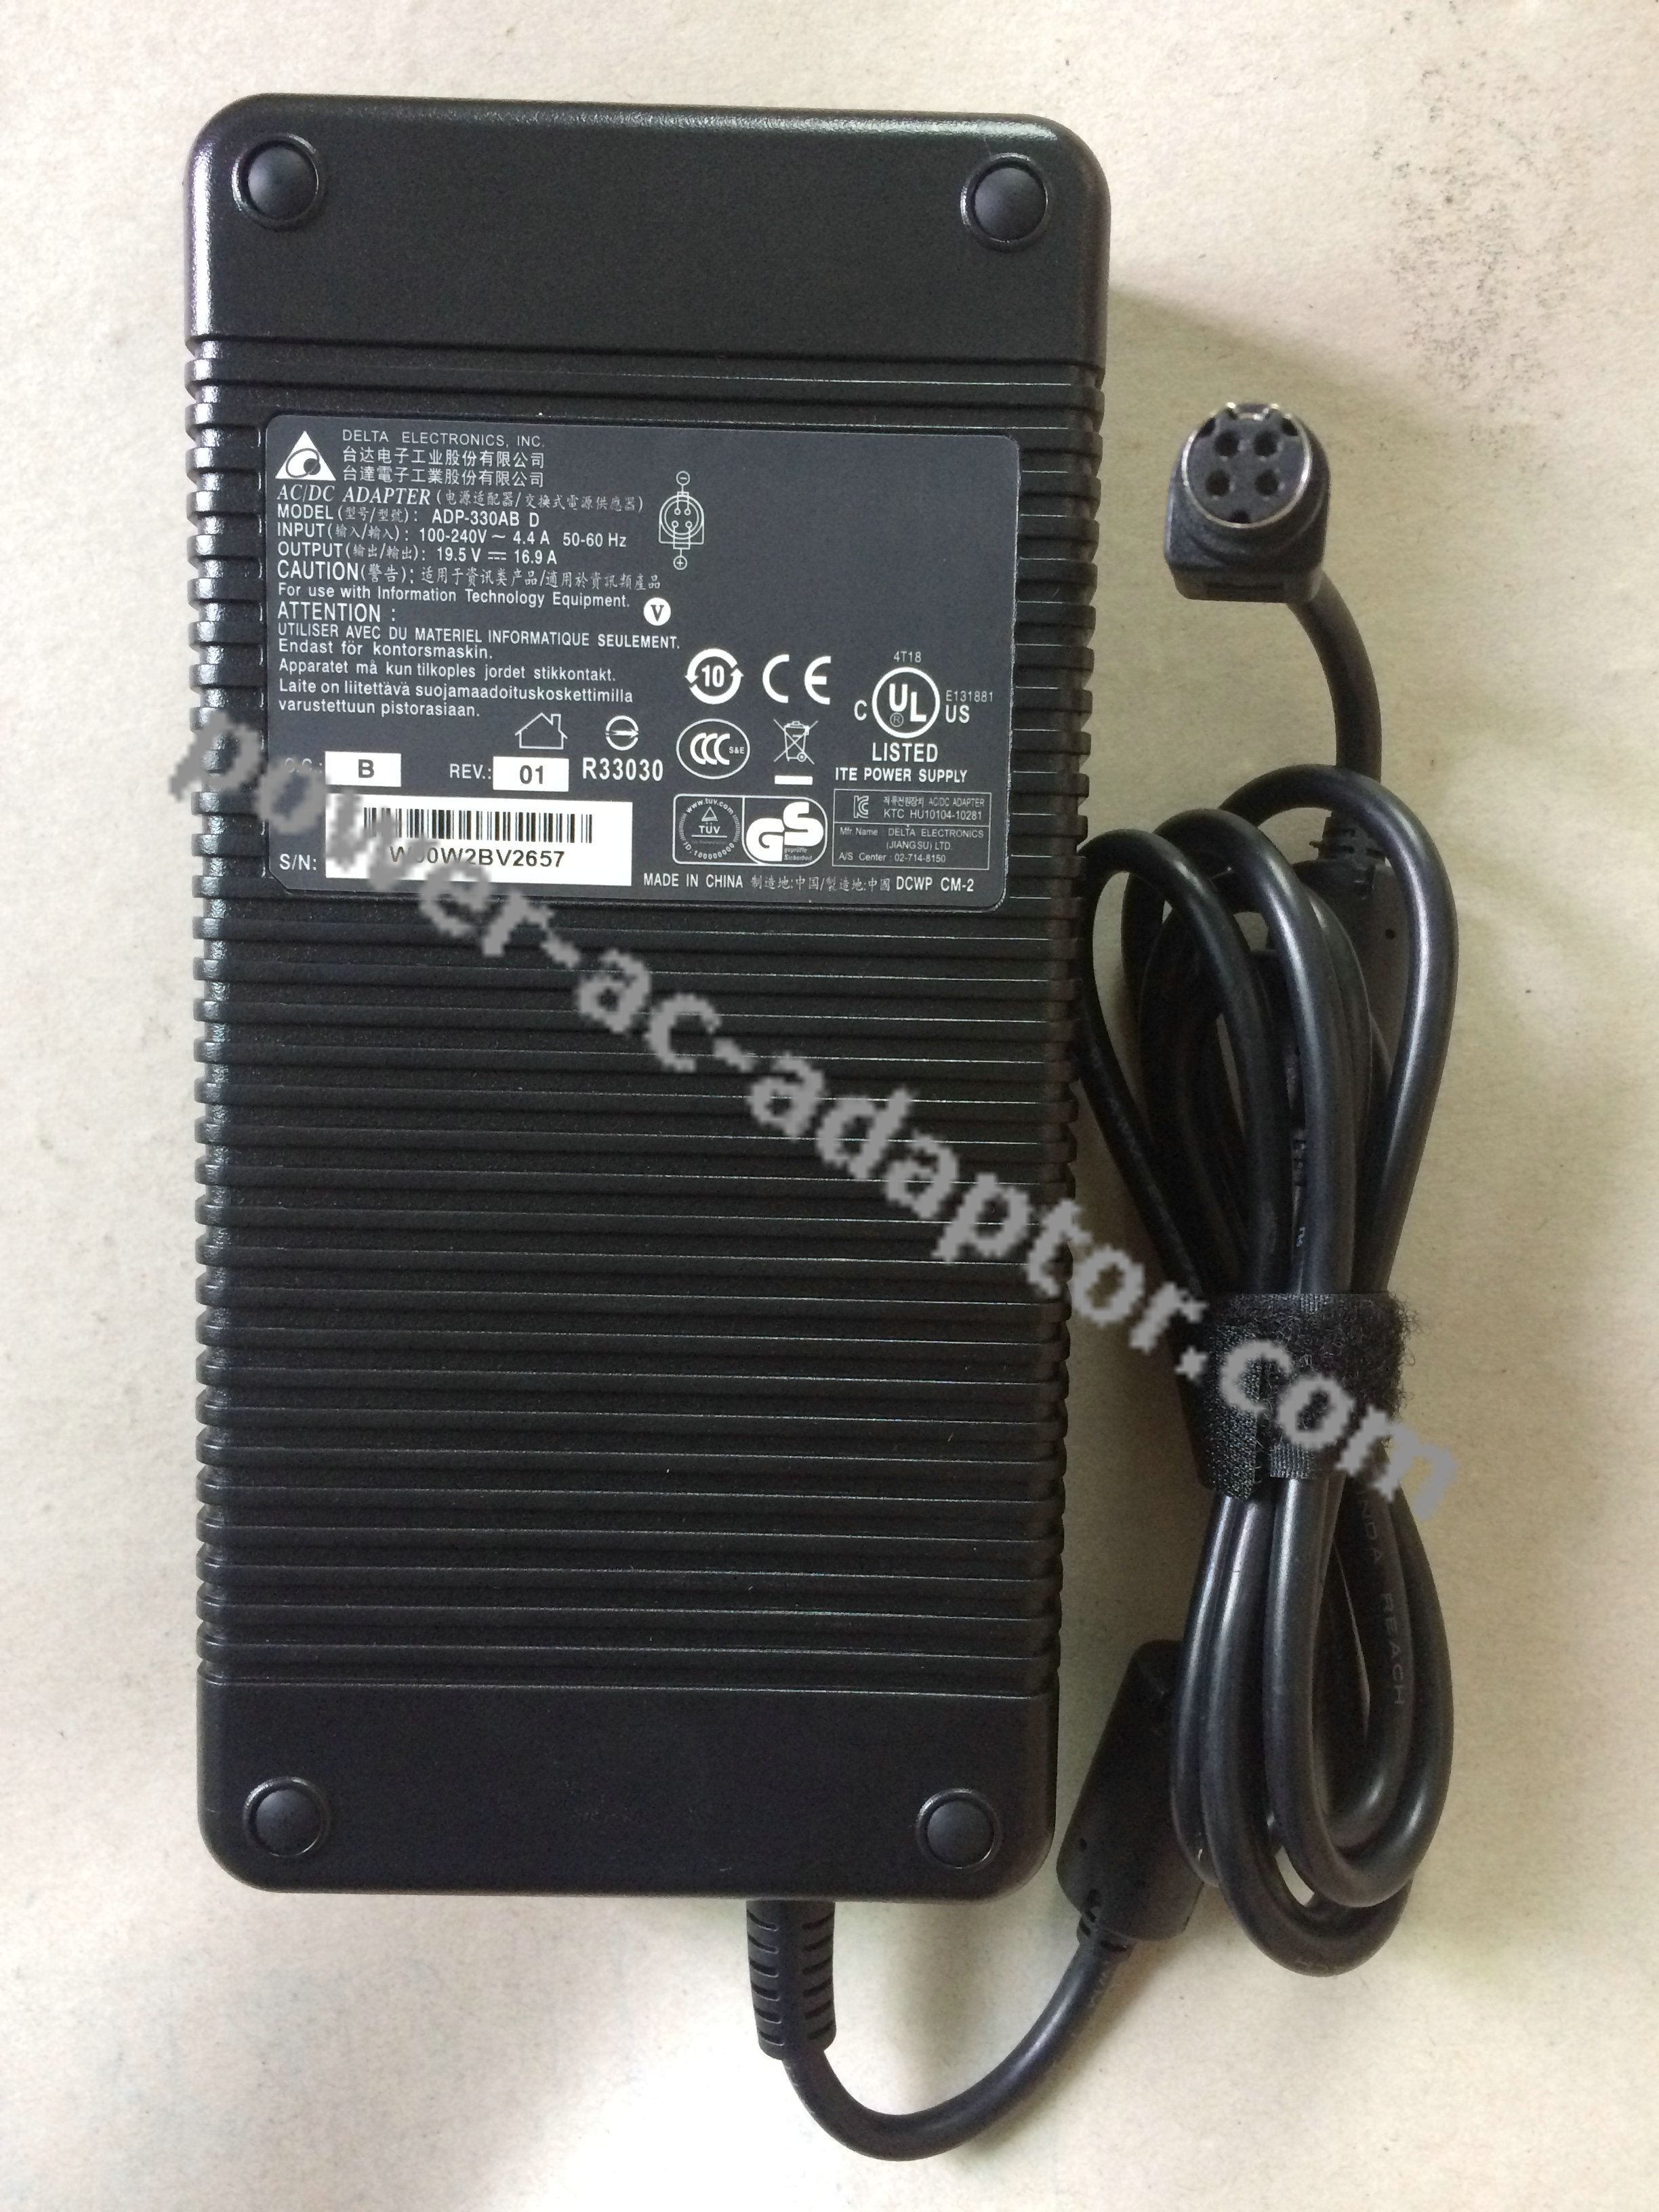 MSI DELTA ADP-330AB D 19.5V 16.9A 330W AC Adapter charger 4pin